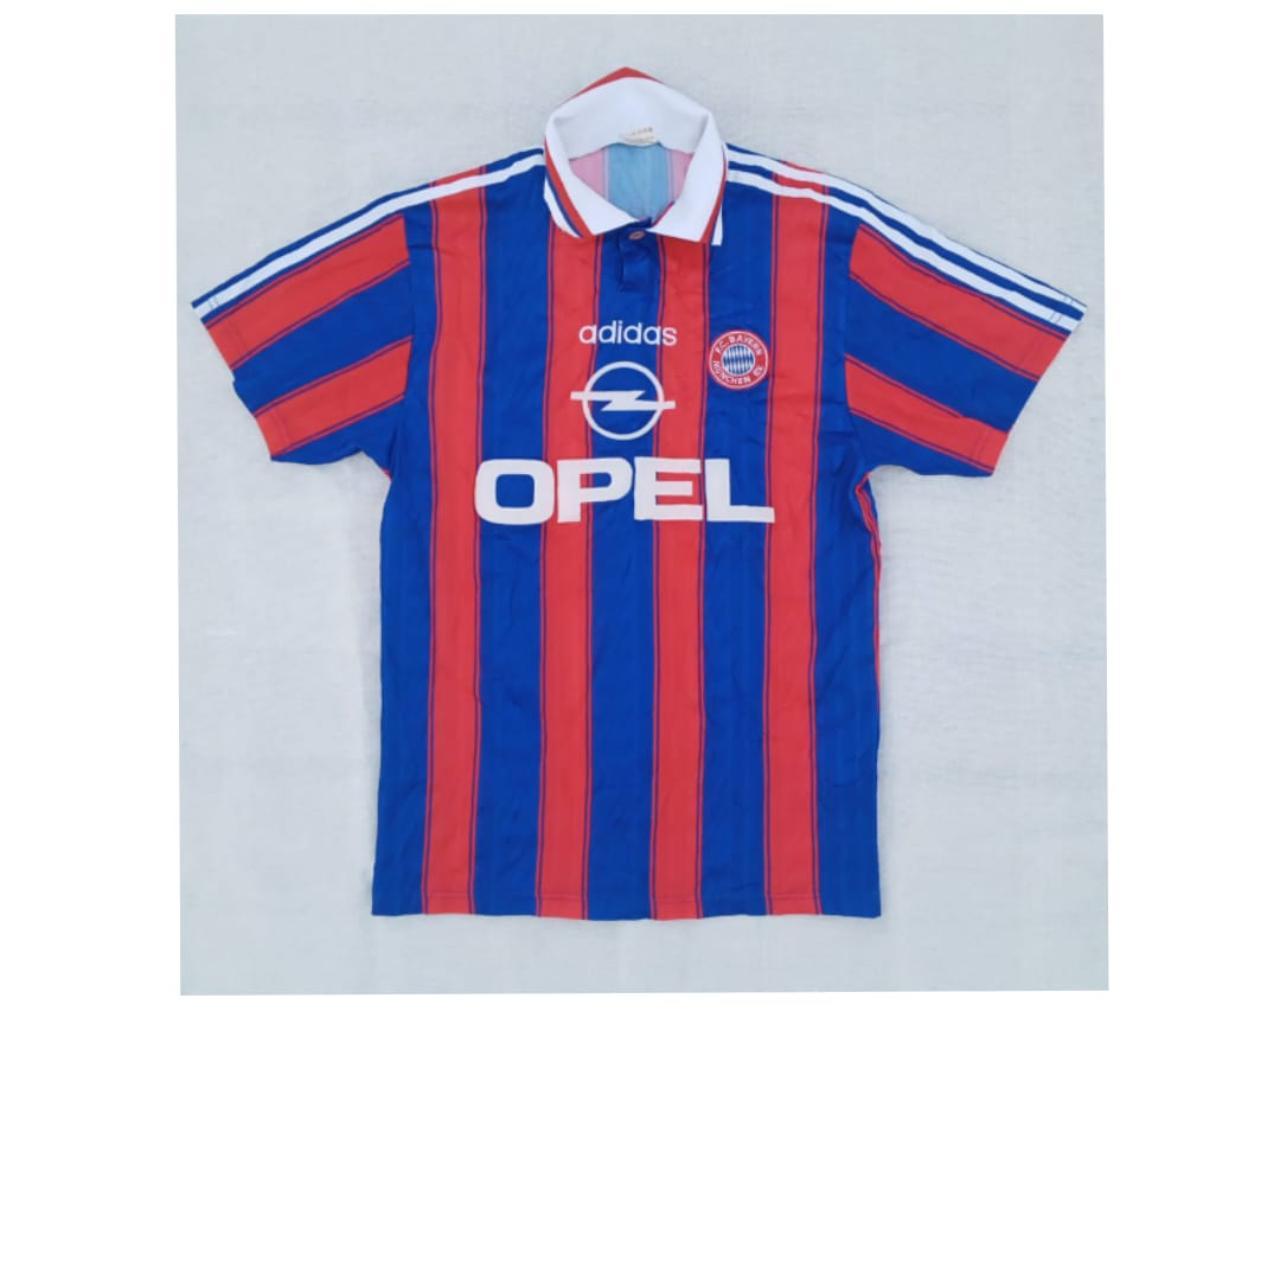 adidas USA 1994 Home Jersey - USED Condition (Good) - Size L